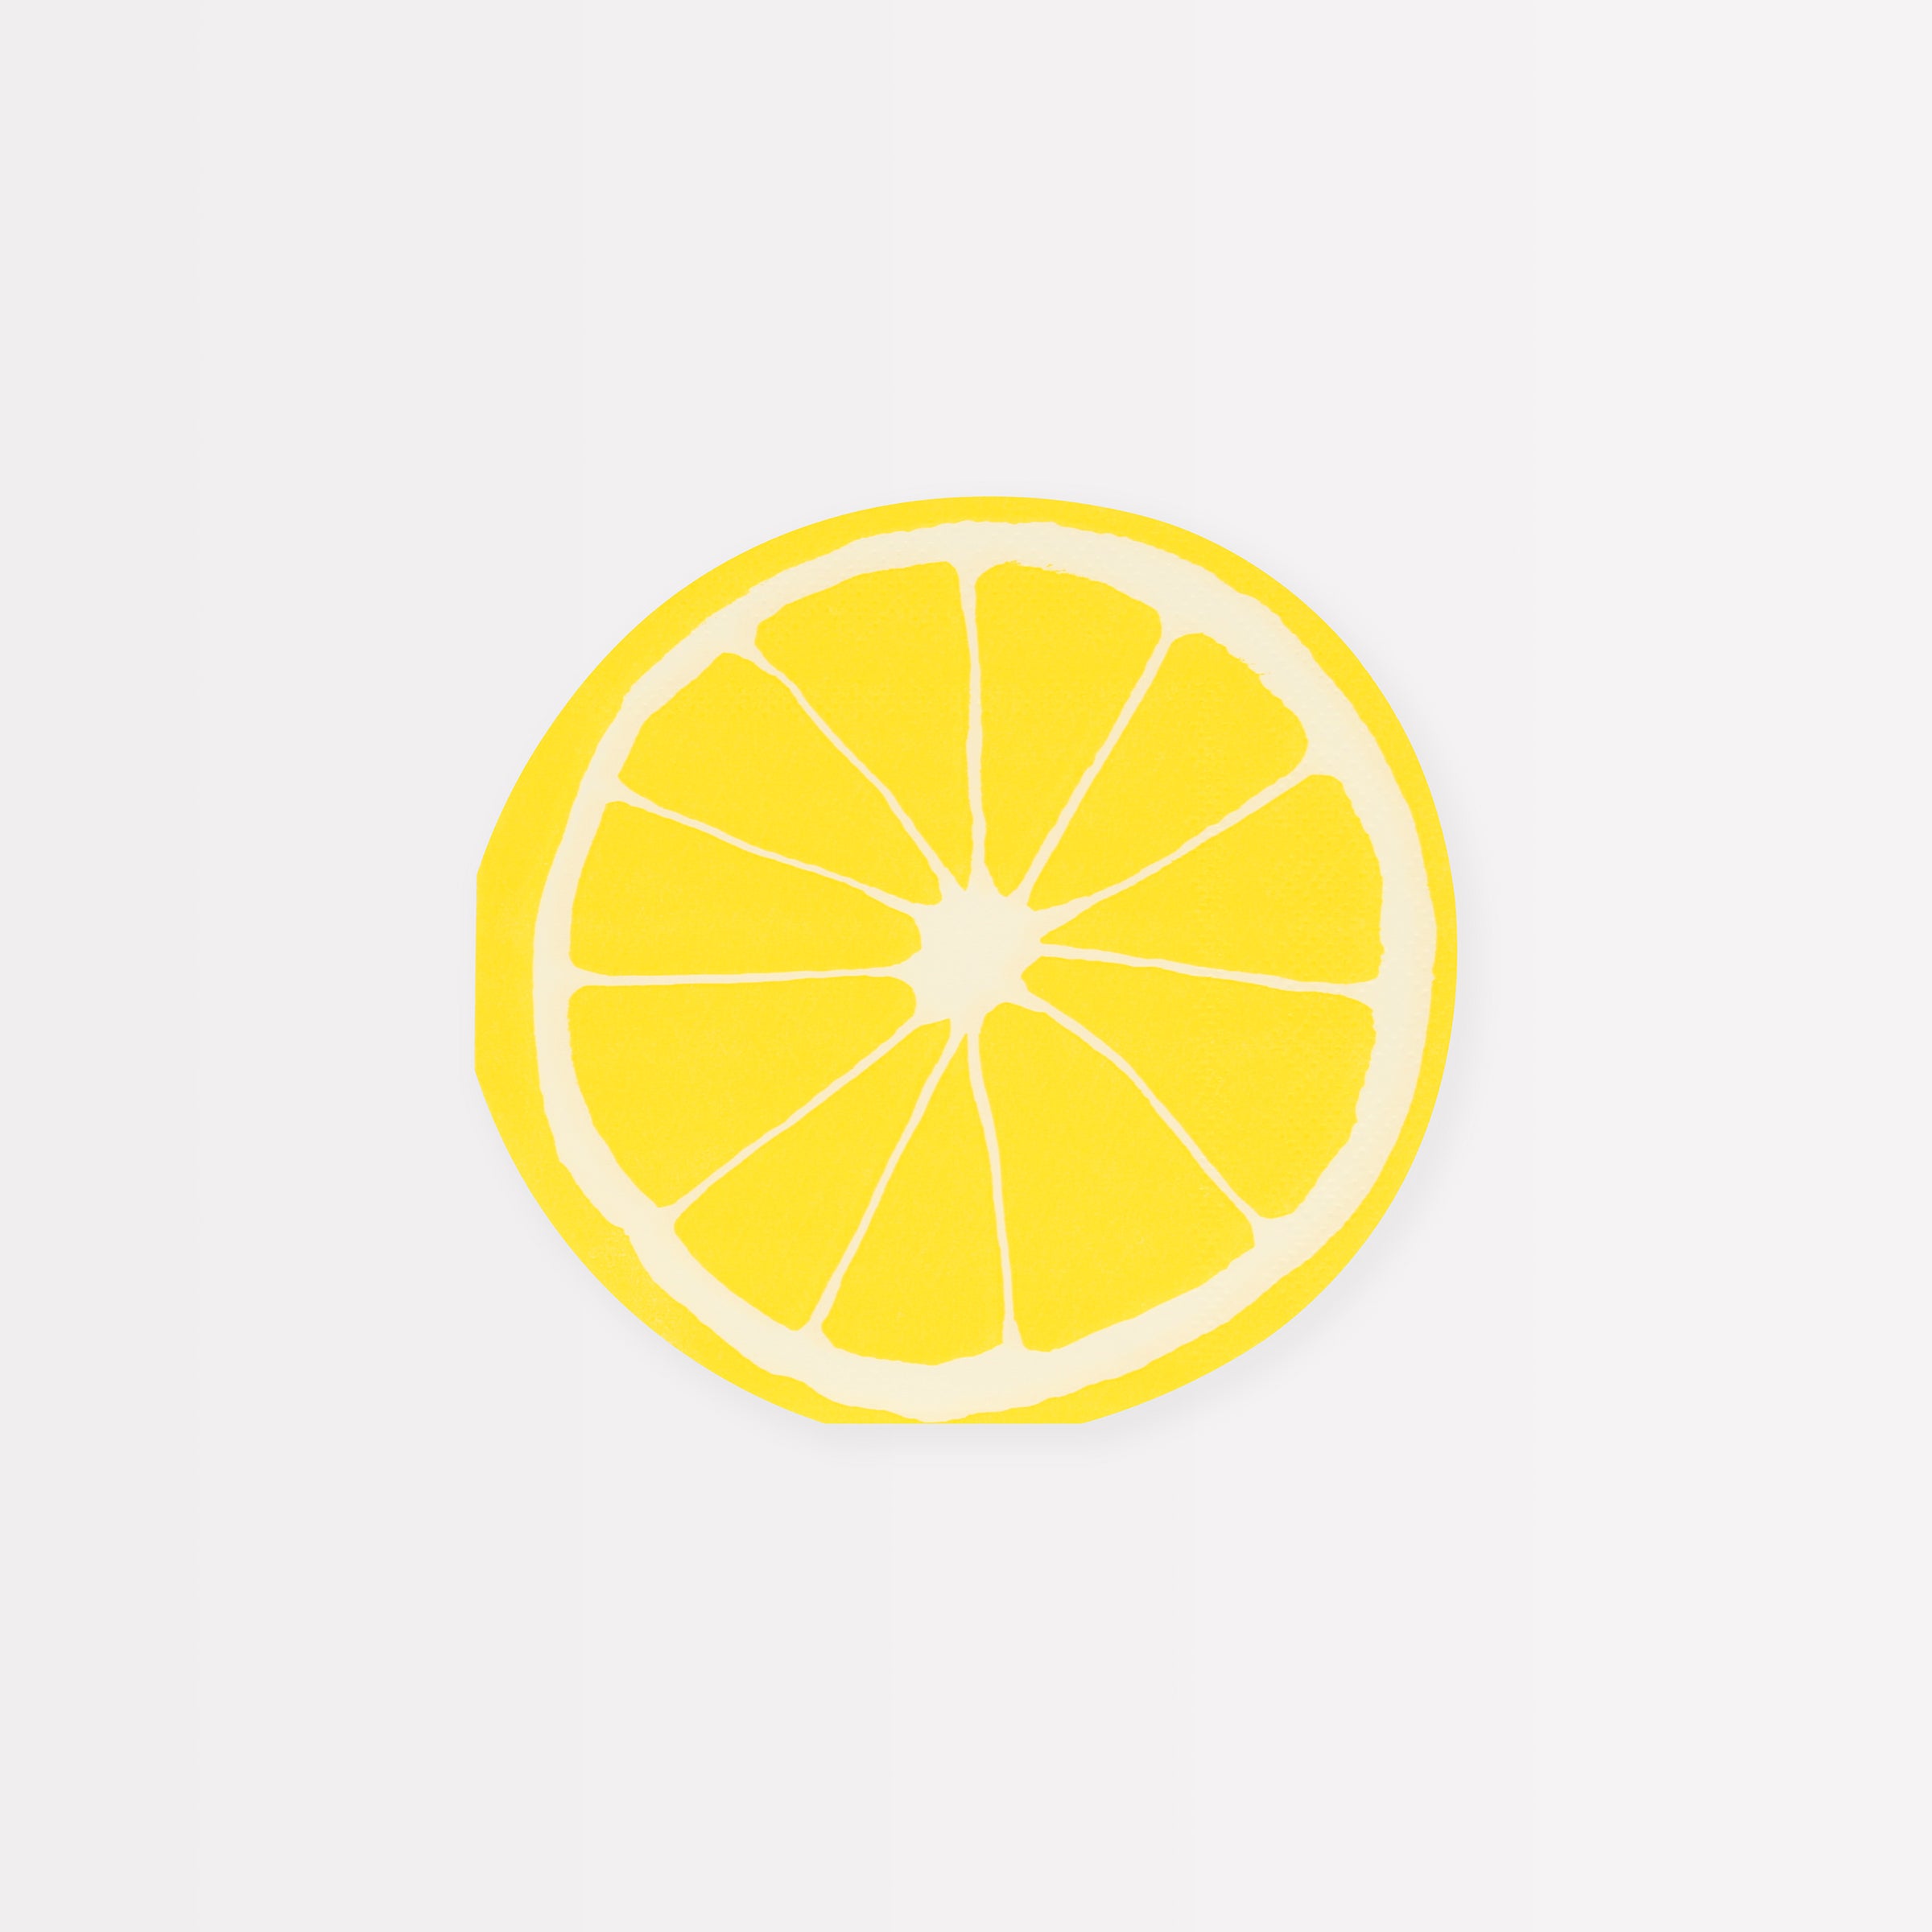 Our paper napkins, in the shape of a slice of lemon, are great as cocktail napkins or as kids napkins.